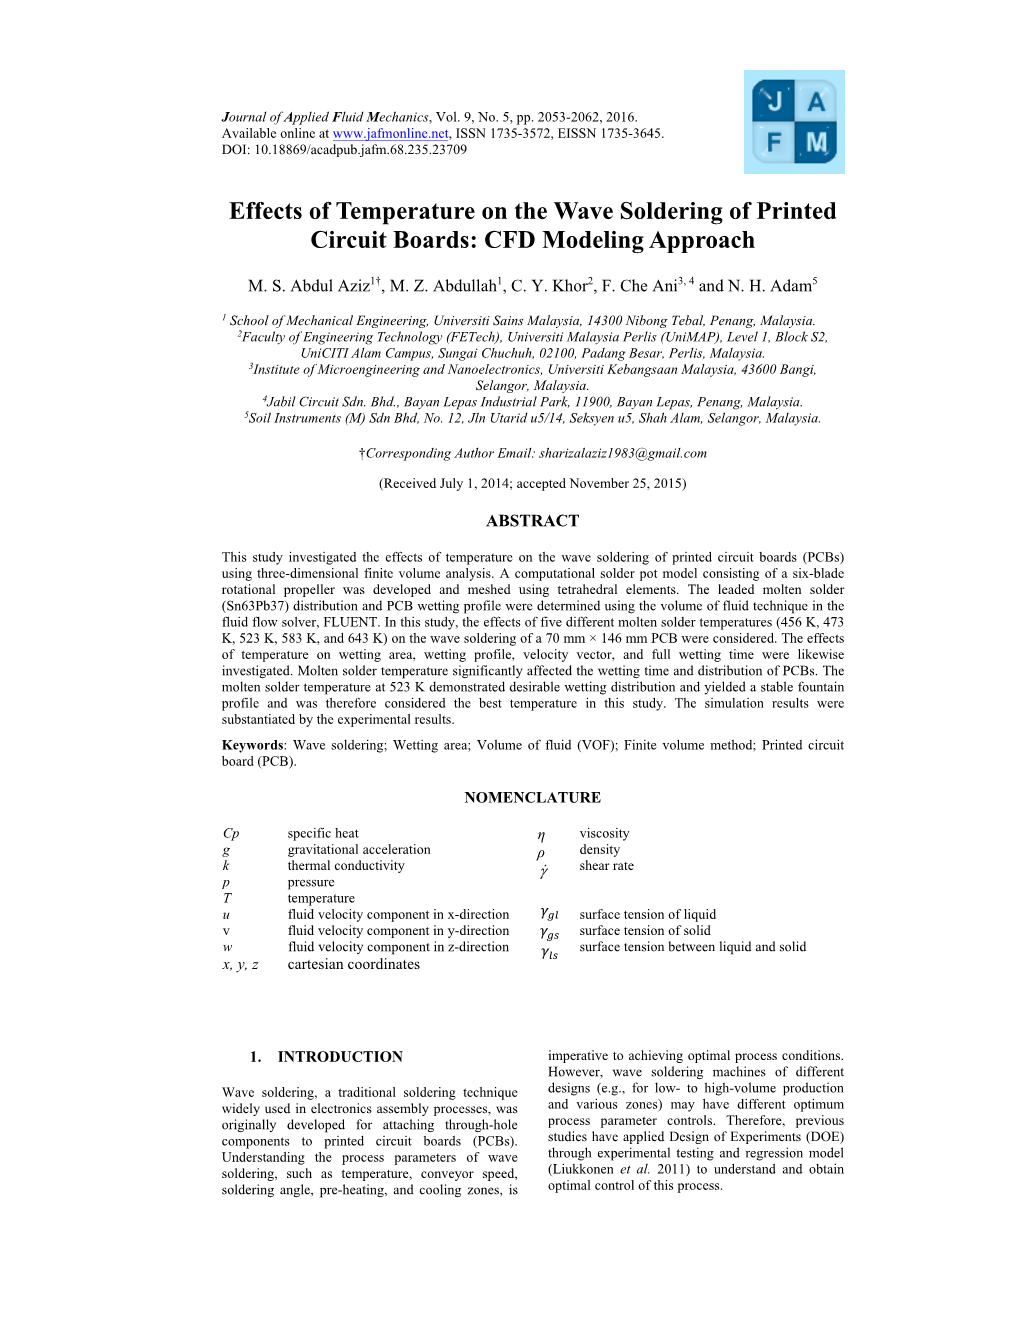 Effects of Temperature on the Wave Soldering of Printed Circuit Boards: CFD Modeling Approach